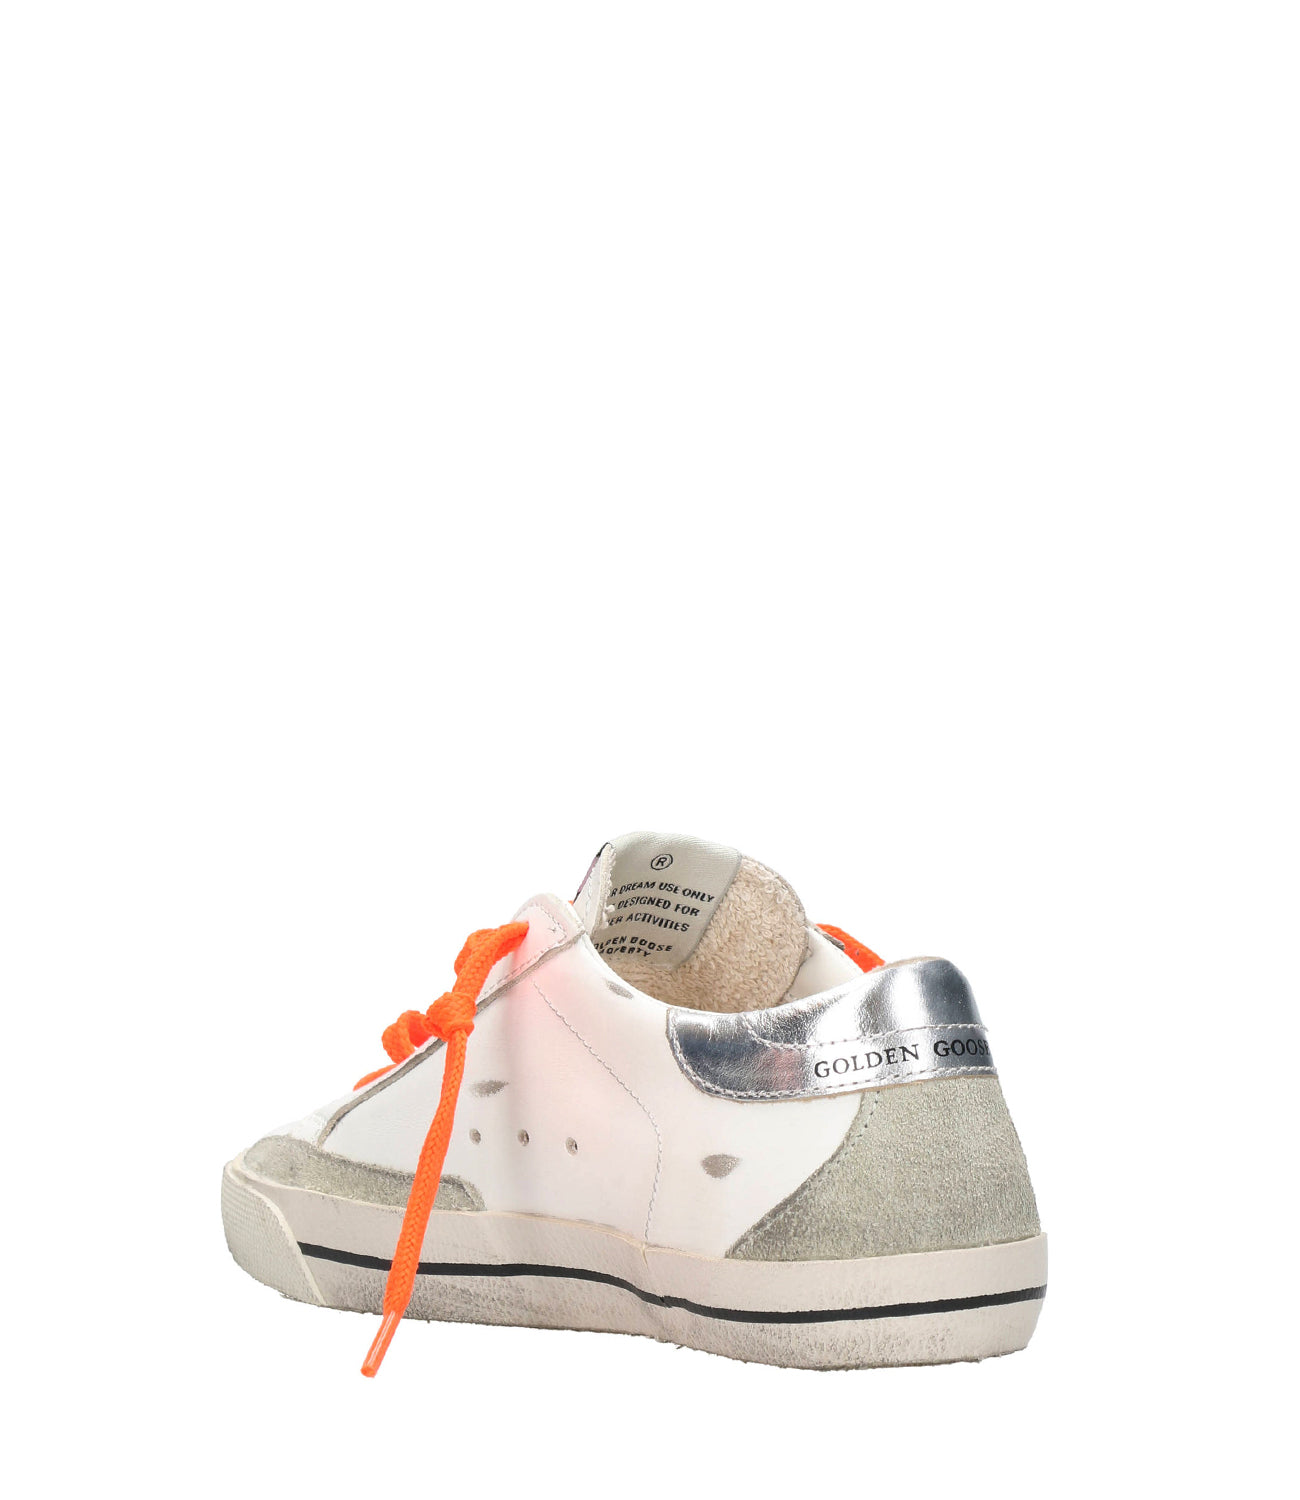 Golden Goose Deluxe Brand | Sneakers White, Turquoise and Silver